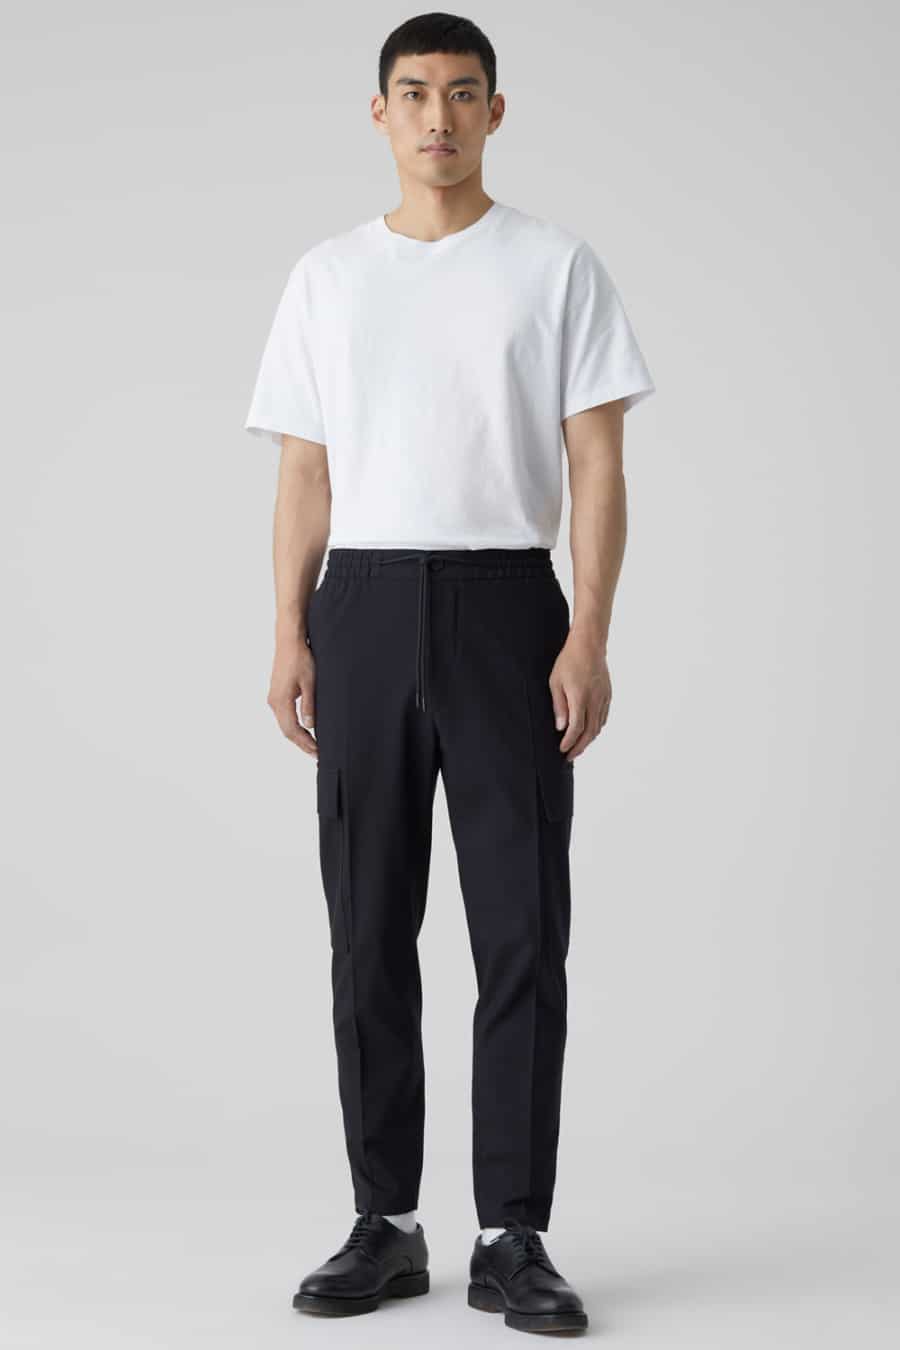 Men's black cargo pants, white tucked in T-shirt and black Derby shoes outfit